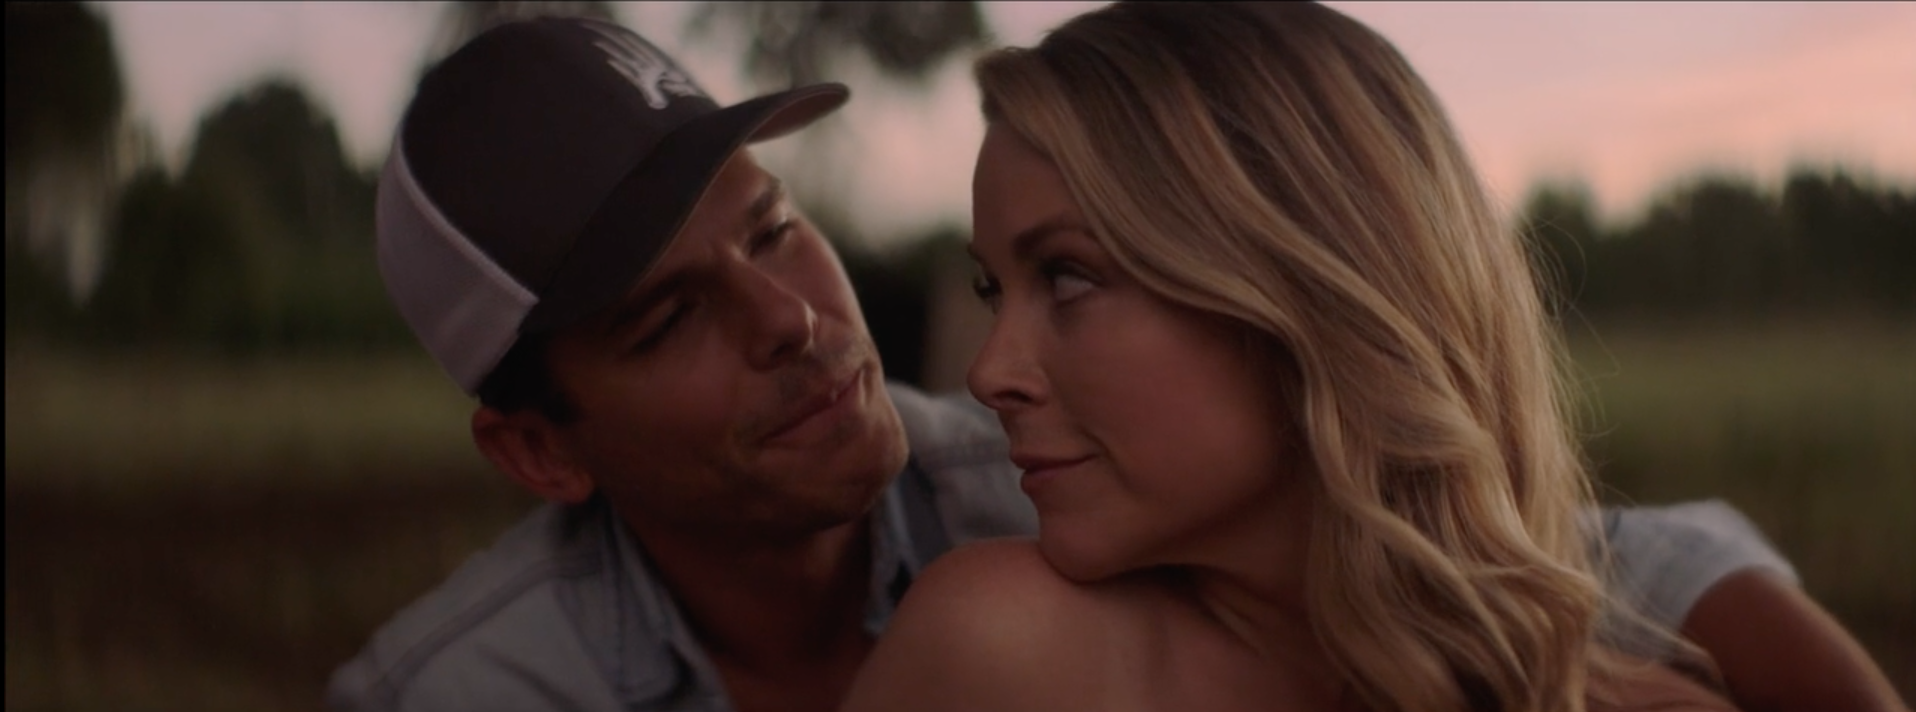 Granger Smith’s Music Video for “You’re In It” Is Filled With Energy and Wife Amber